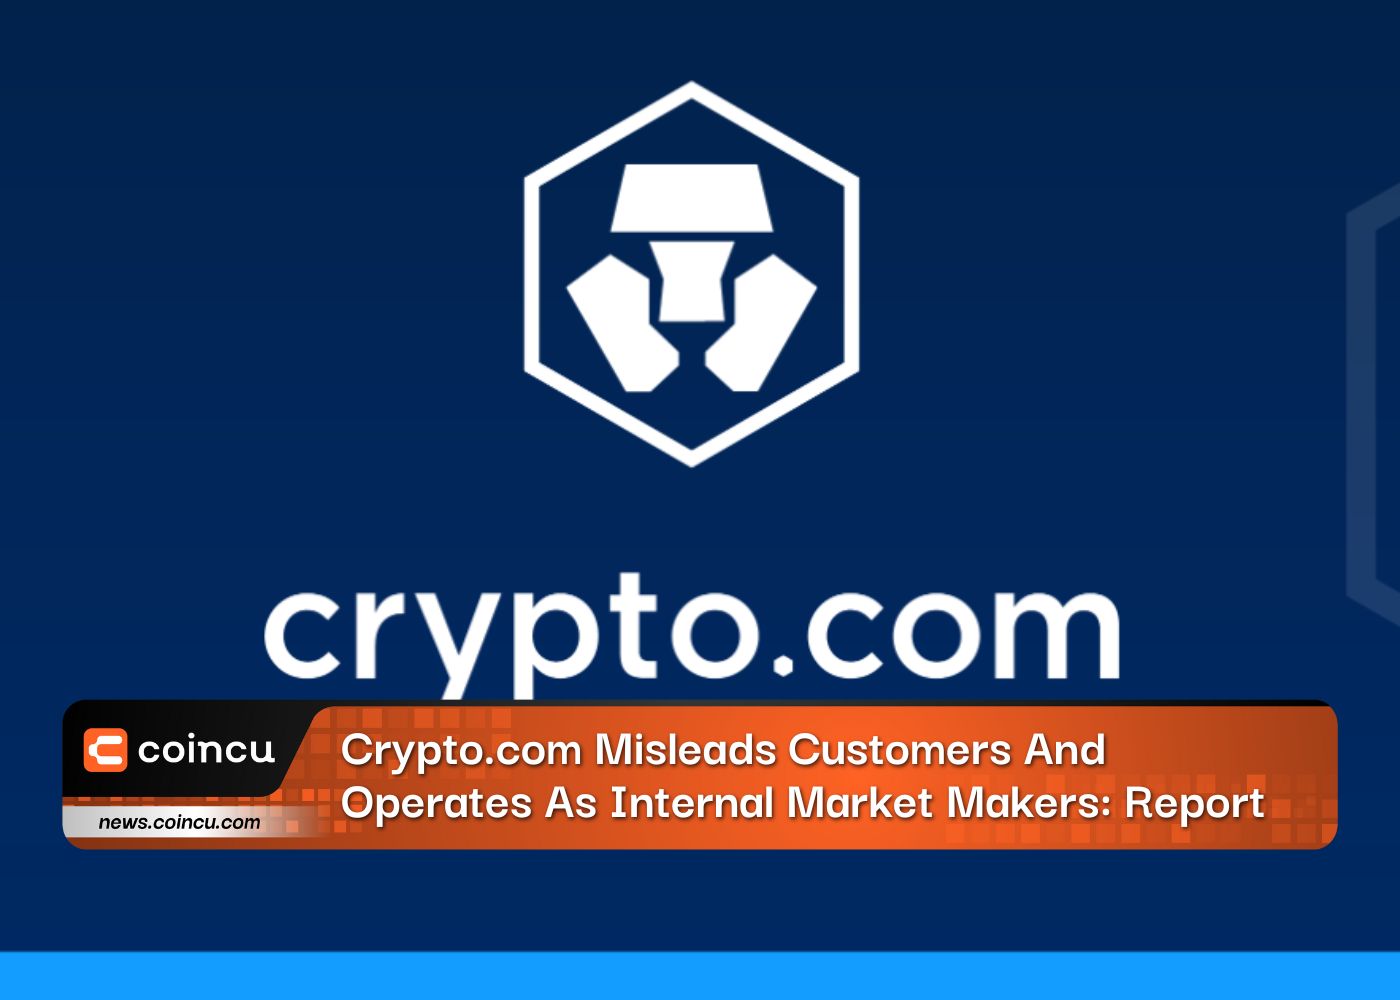 Crypto.com Misleads Customers And Operates As Internal Market Makers: Report